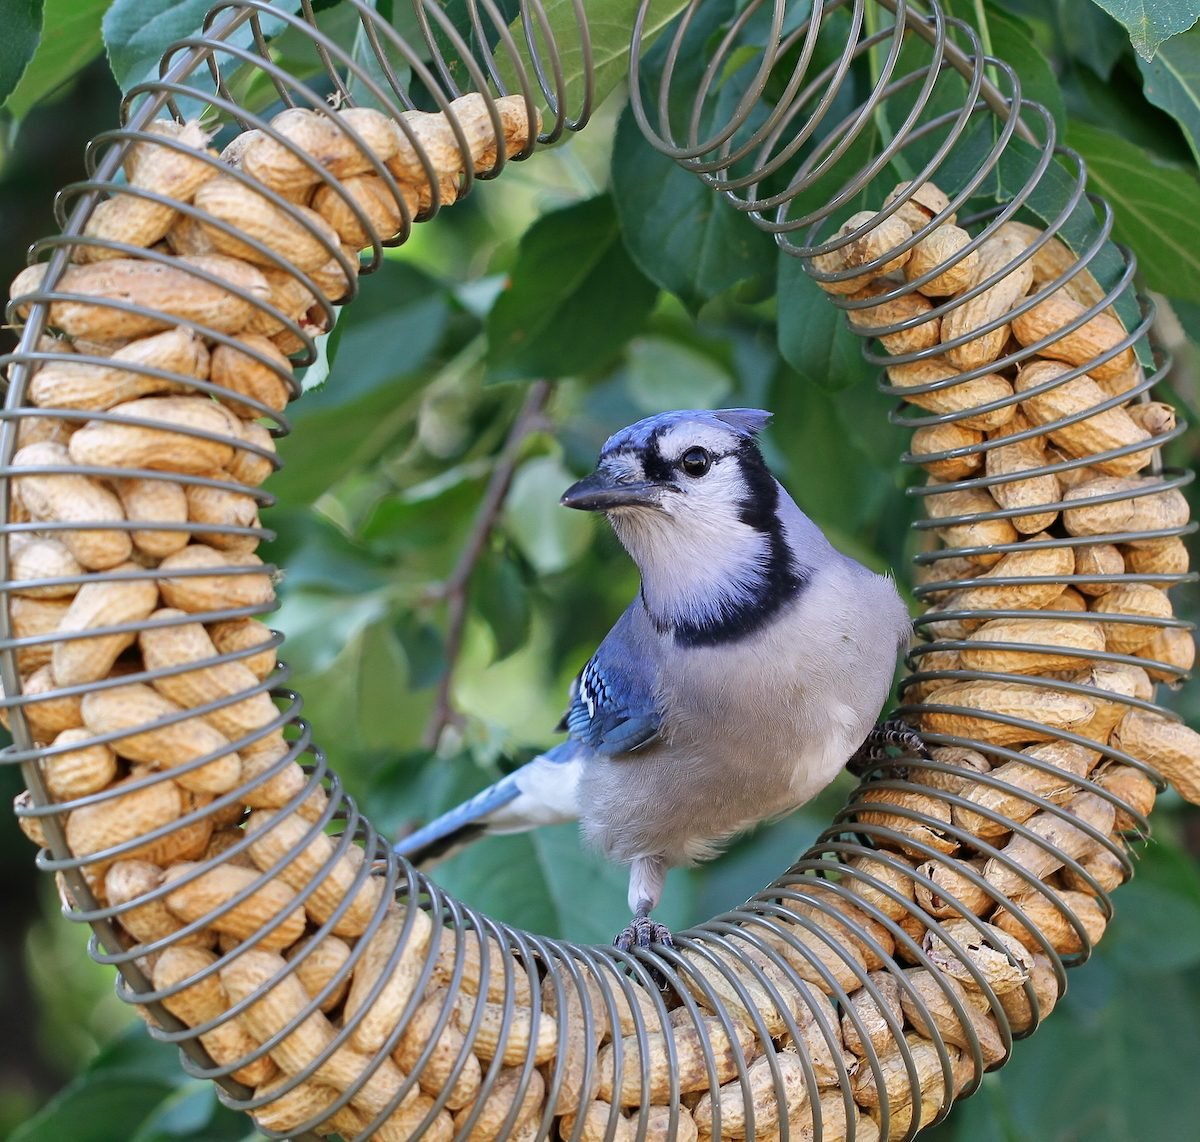 The Beautiful Bluejay